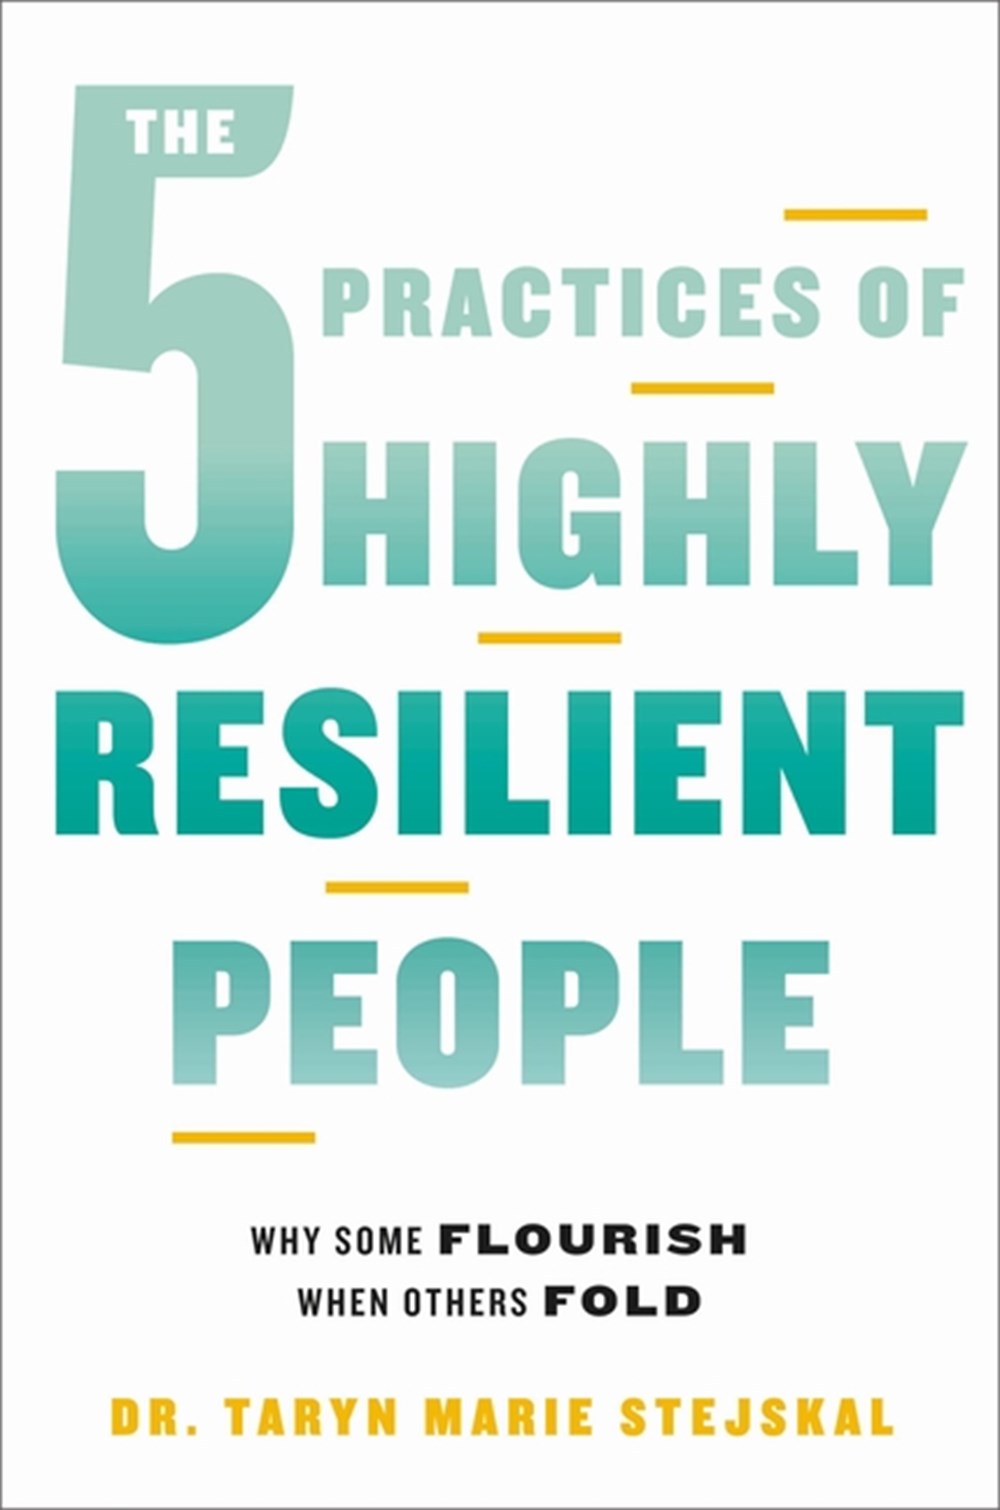 5 Practices of Highly Resilient People: Why Some Flourish When Others Fold